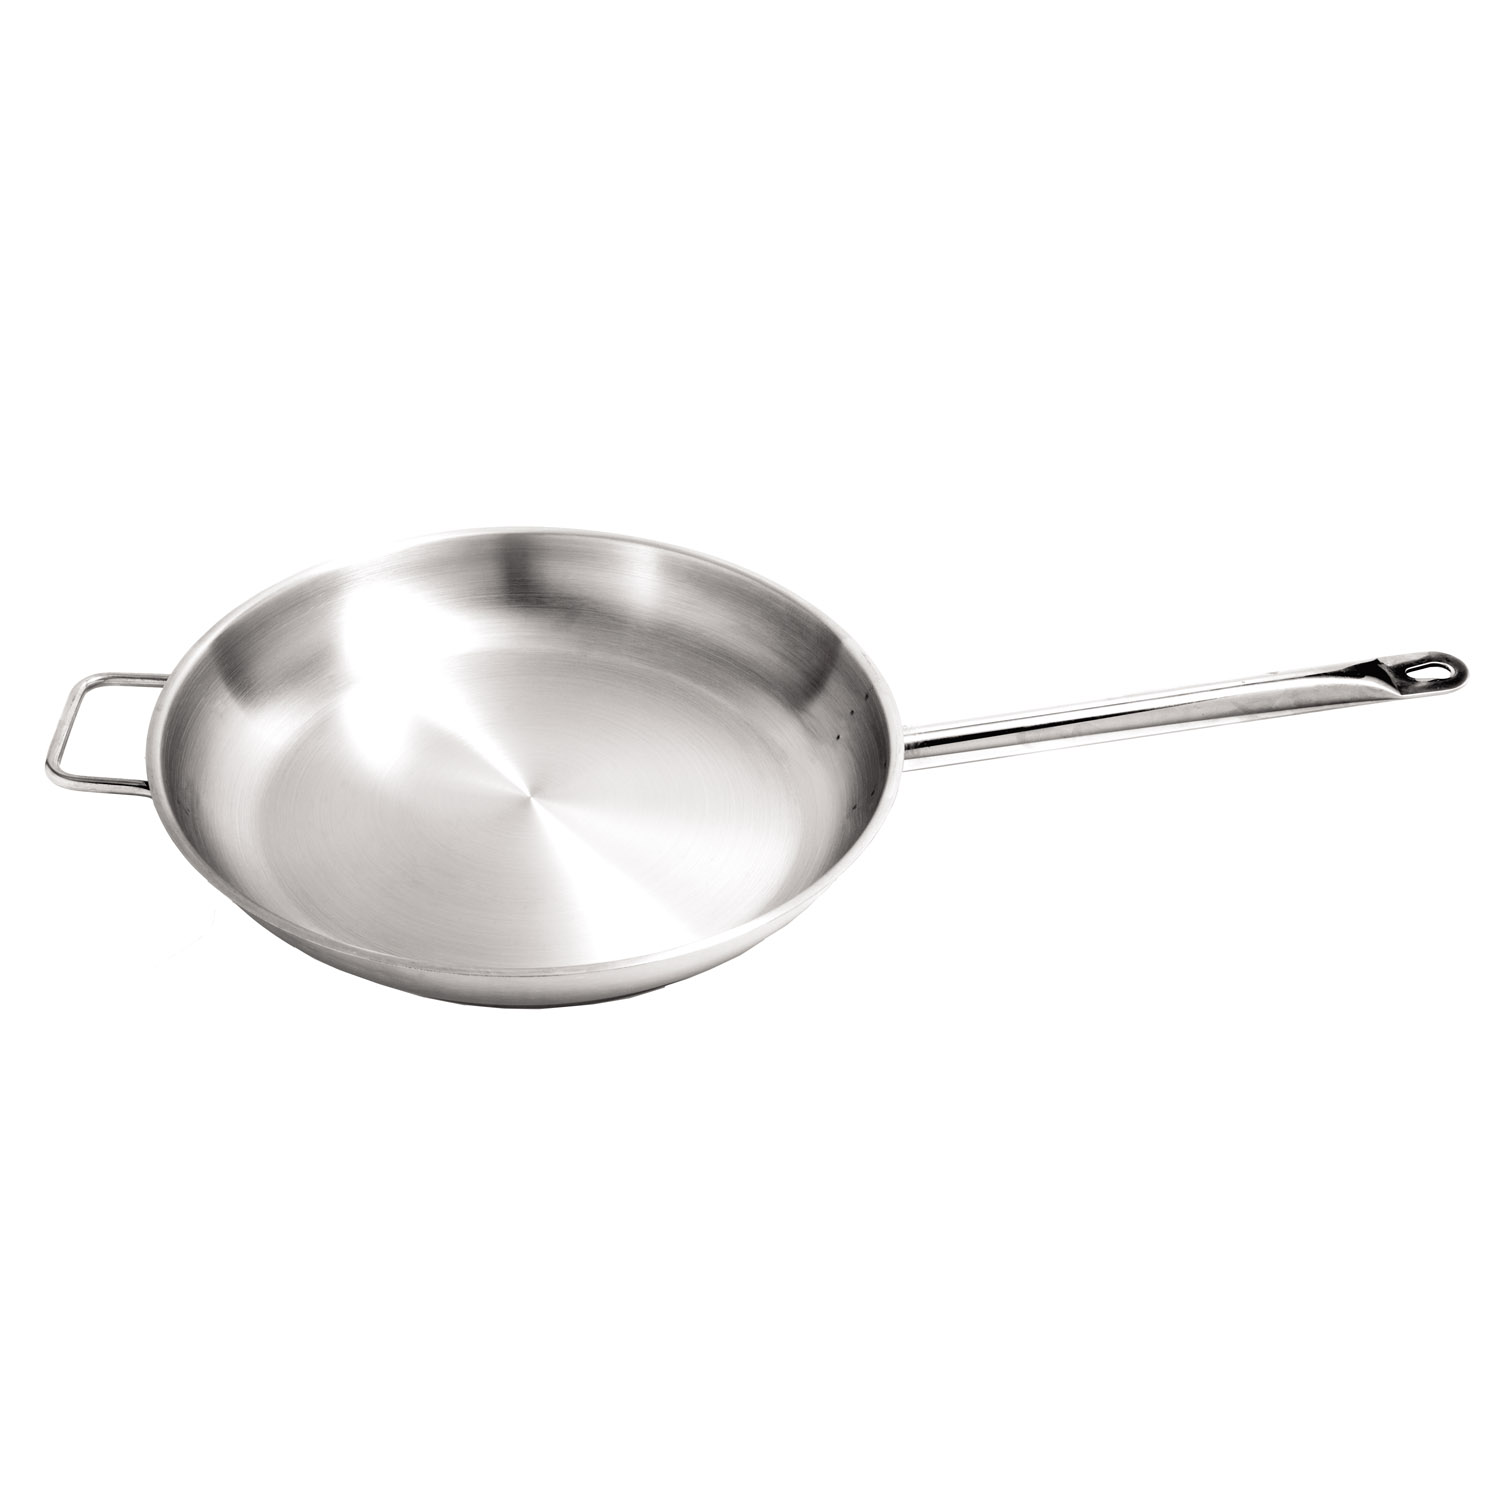 CAC China S1FP-14H Stainless Steel Fry Pan with Helper Handle 14"